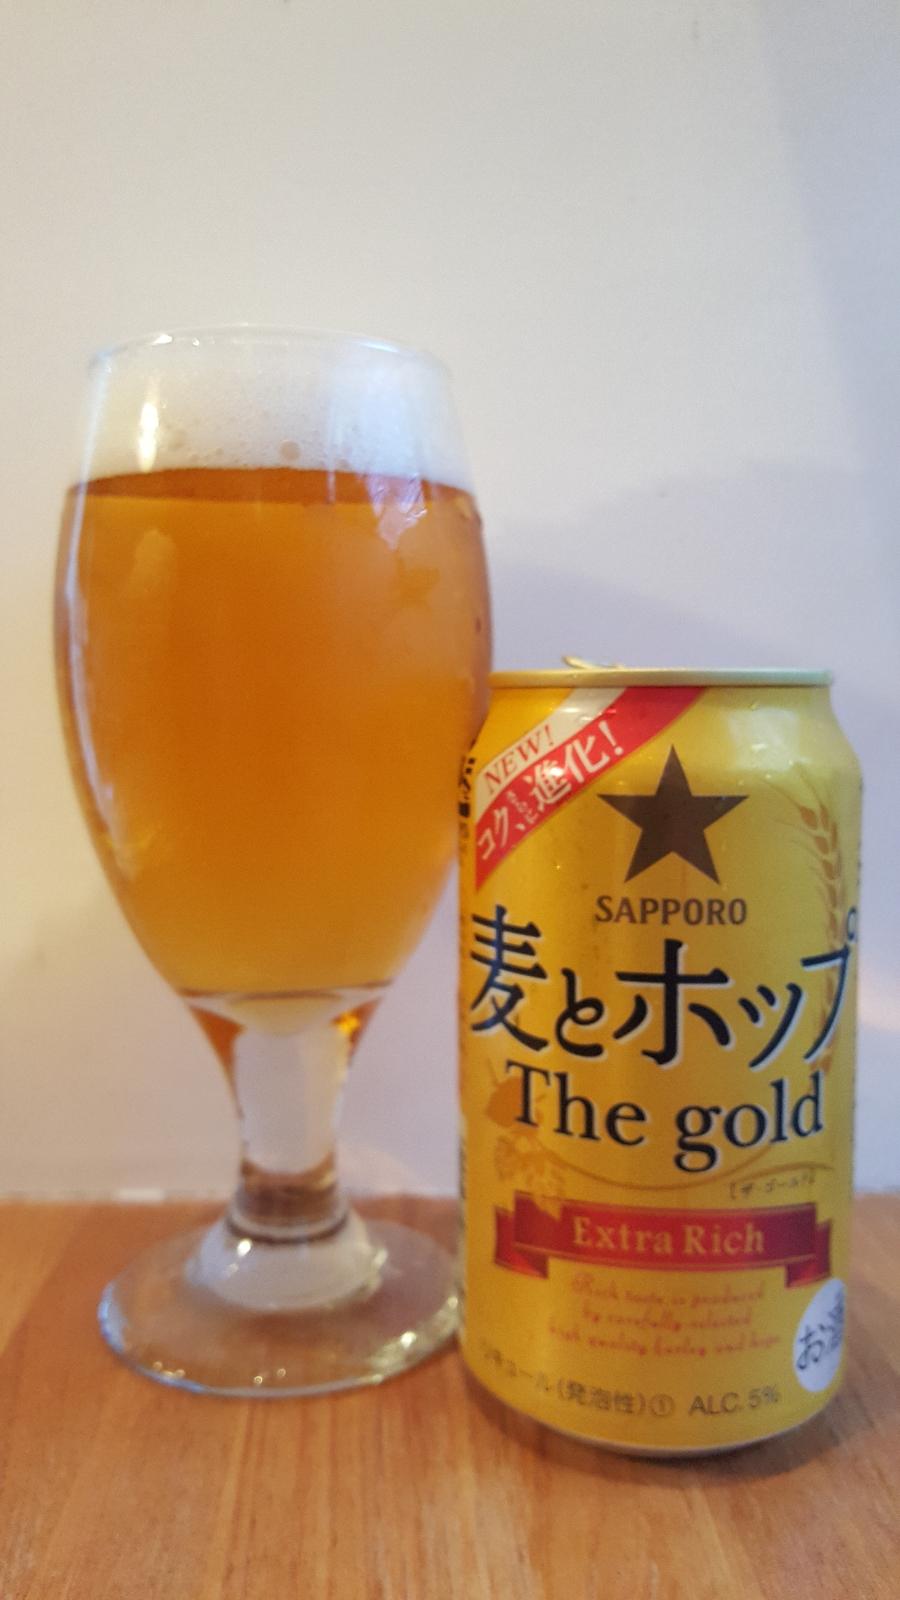 Mugi to Hop The Gold Extra Rich